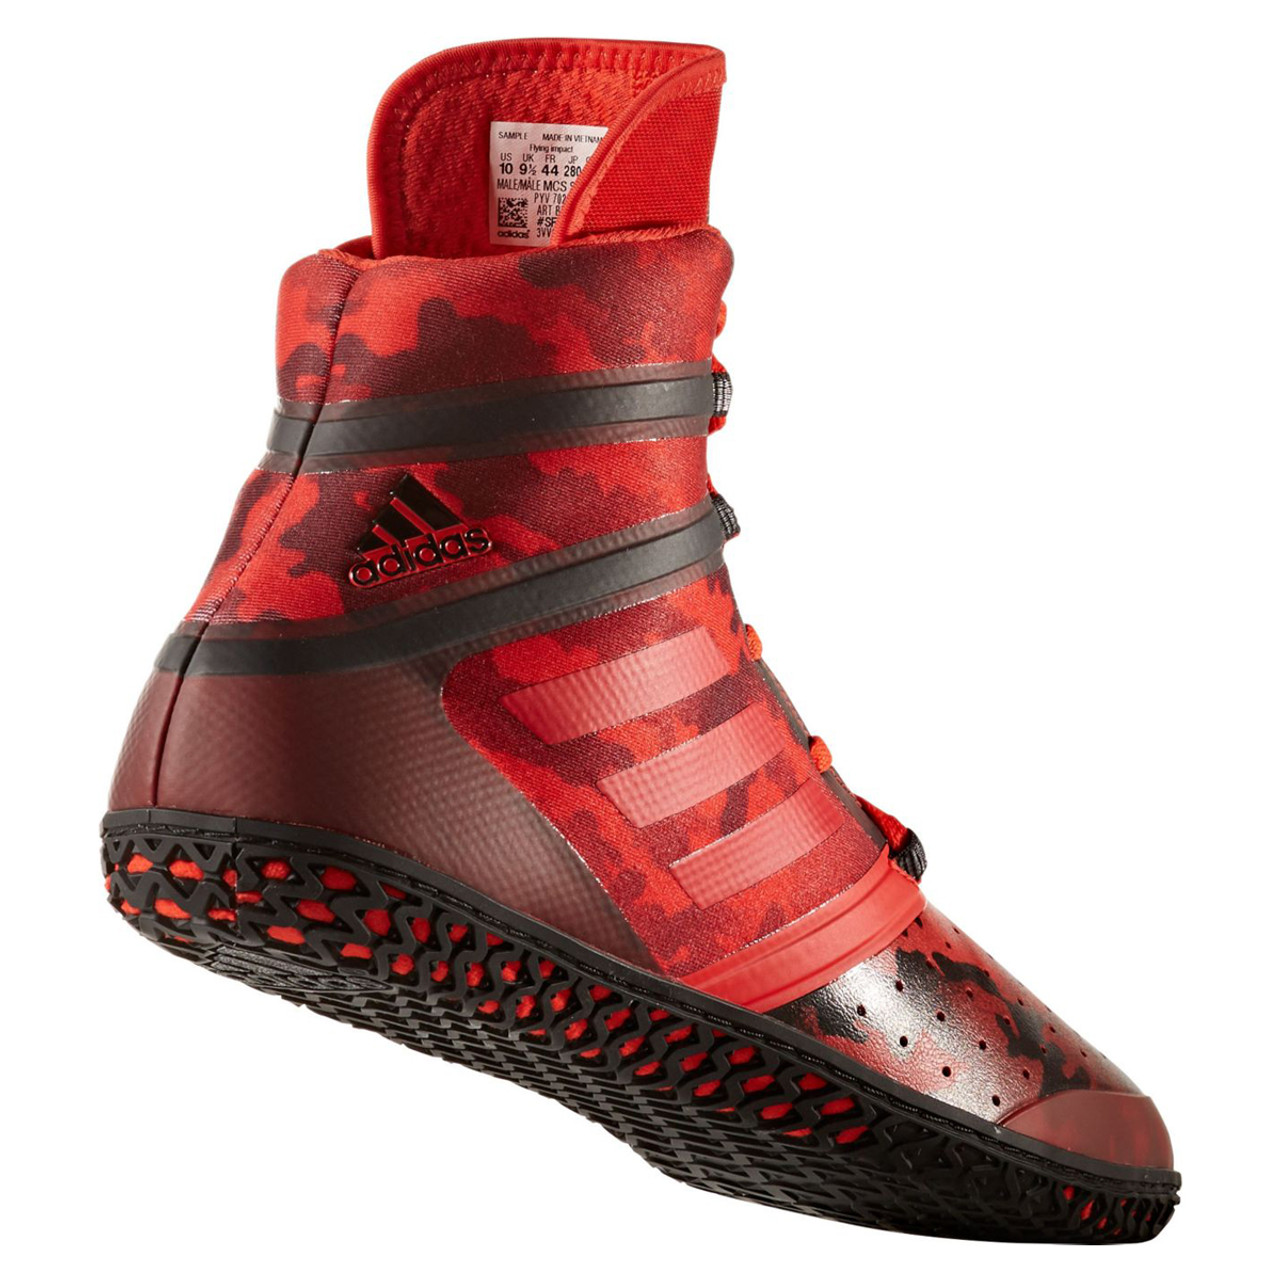 Adidas Impact Men's Wrestling Shoes BY1580 Red Camo